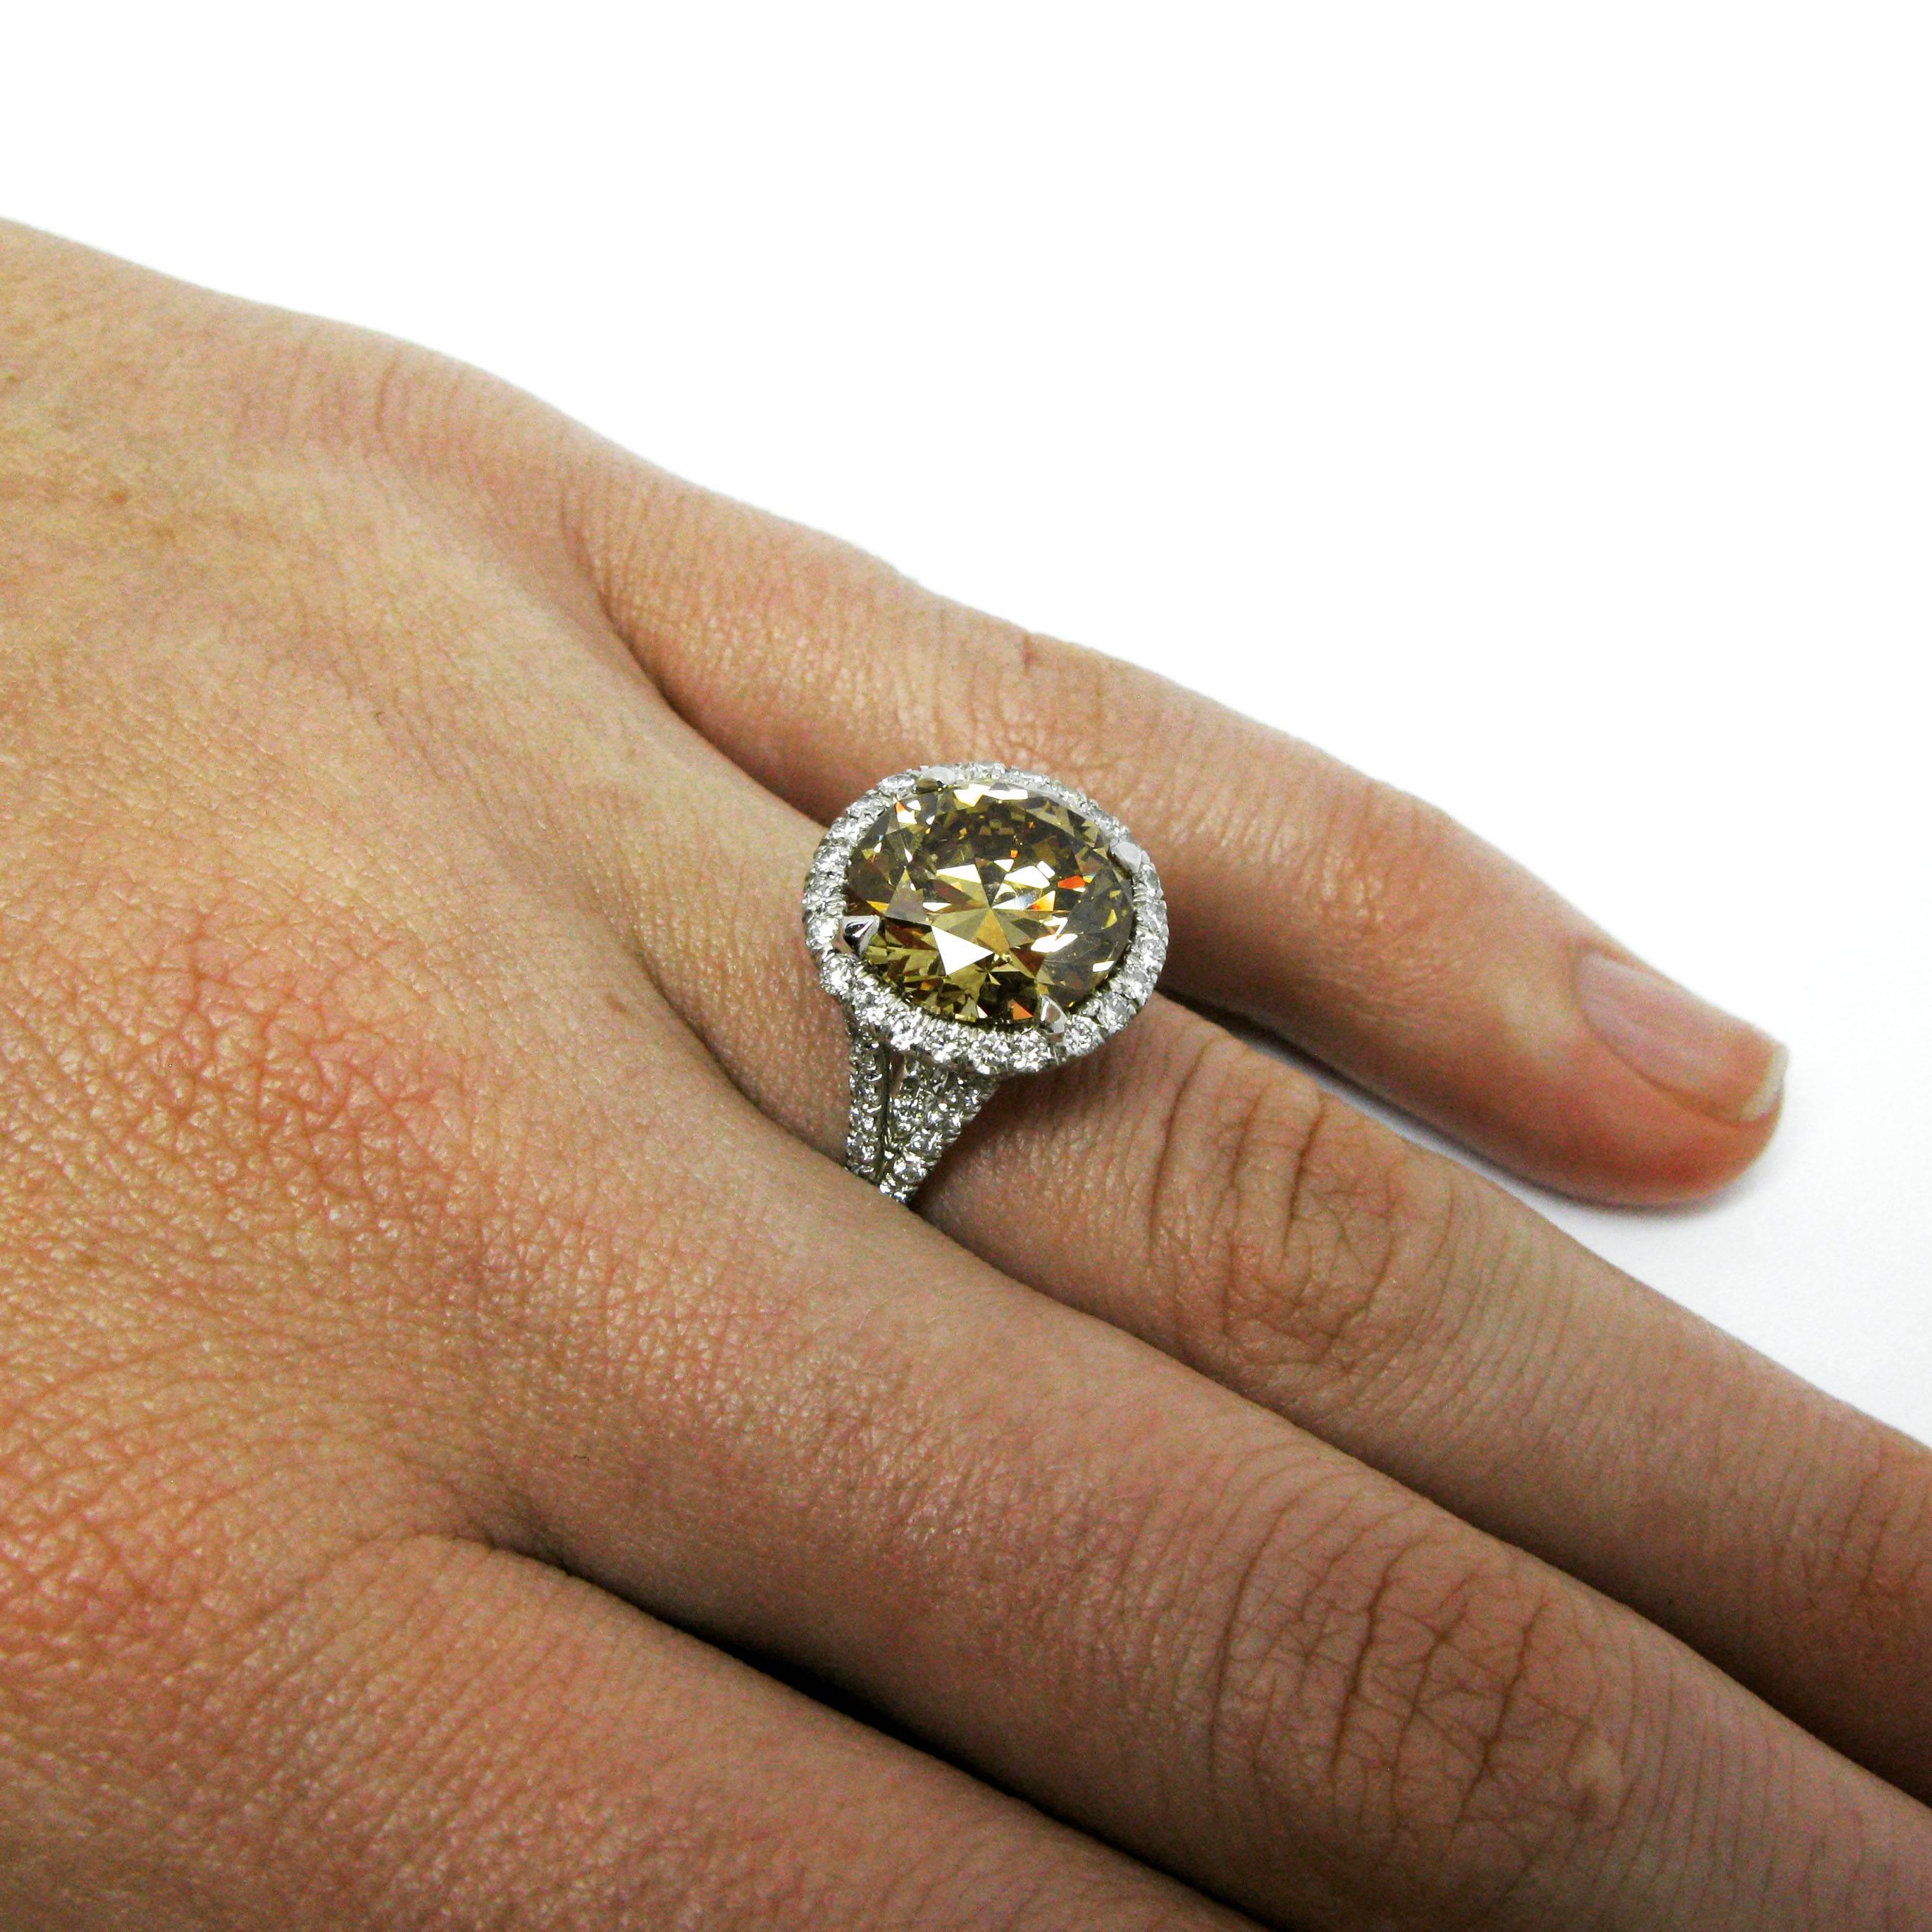 A contemporary ring centers around a 5.02 carat round brilliant-cut diamond with Fancy Brownish Yellow color and SI2 clarity. This beauty is set in a platinum split-shank frame mounting accented with pave diamonds.

Purchase includes a GIA Diamond